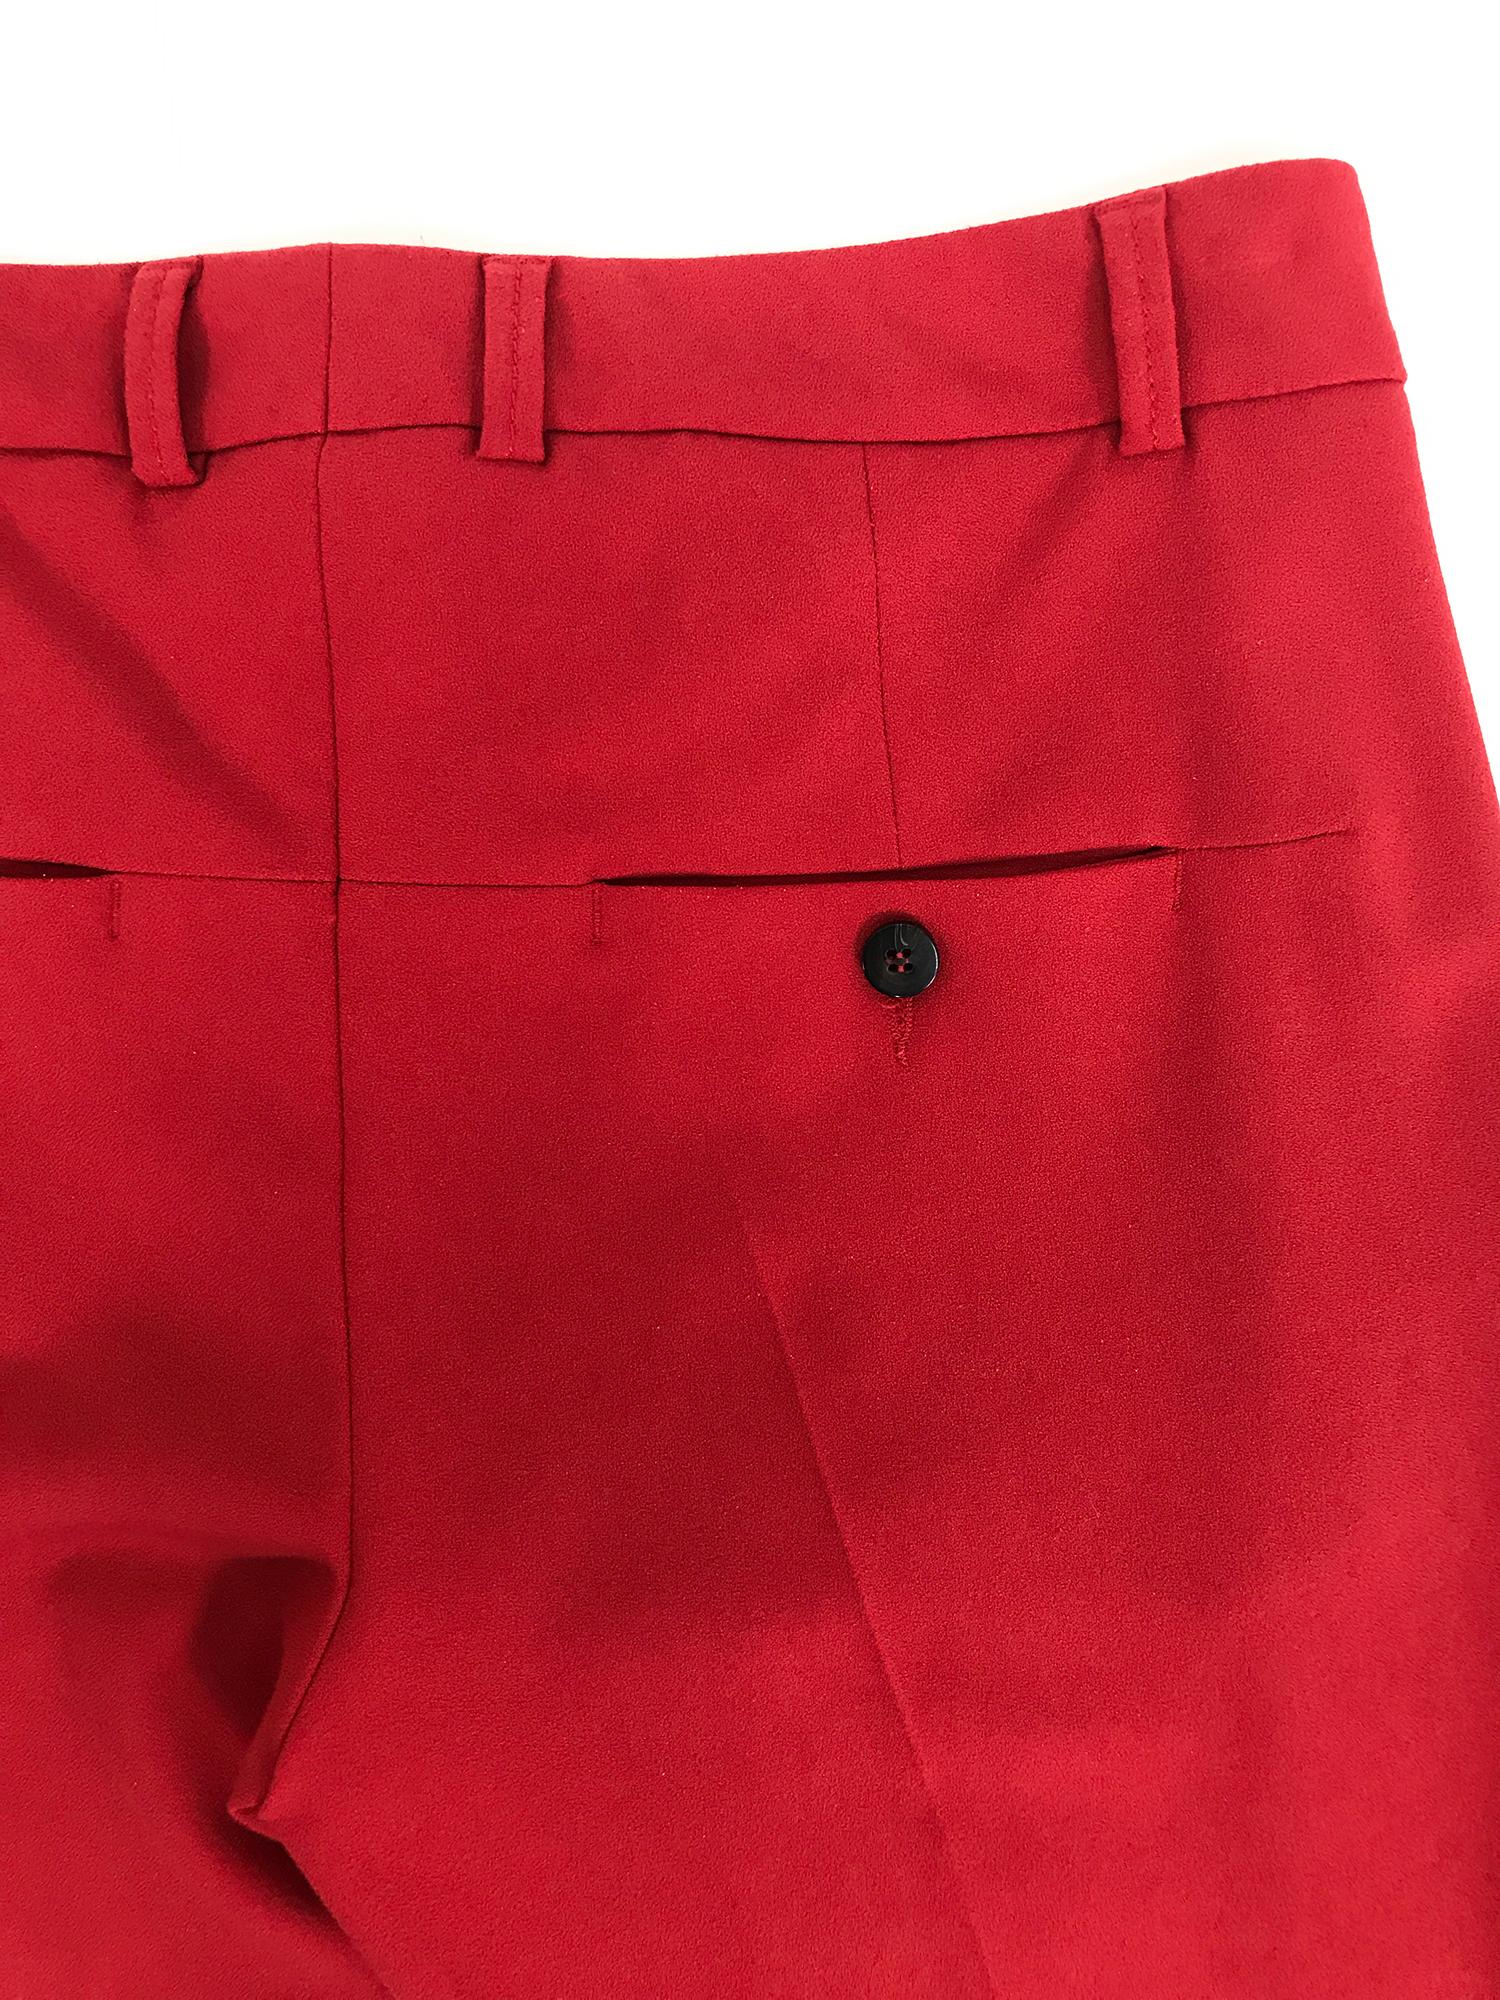 Women's Rene Lezard Red Crepe Tapered Cuff Trousers 36  For Sale